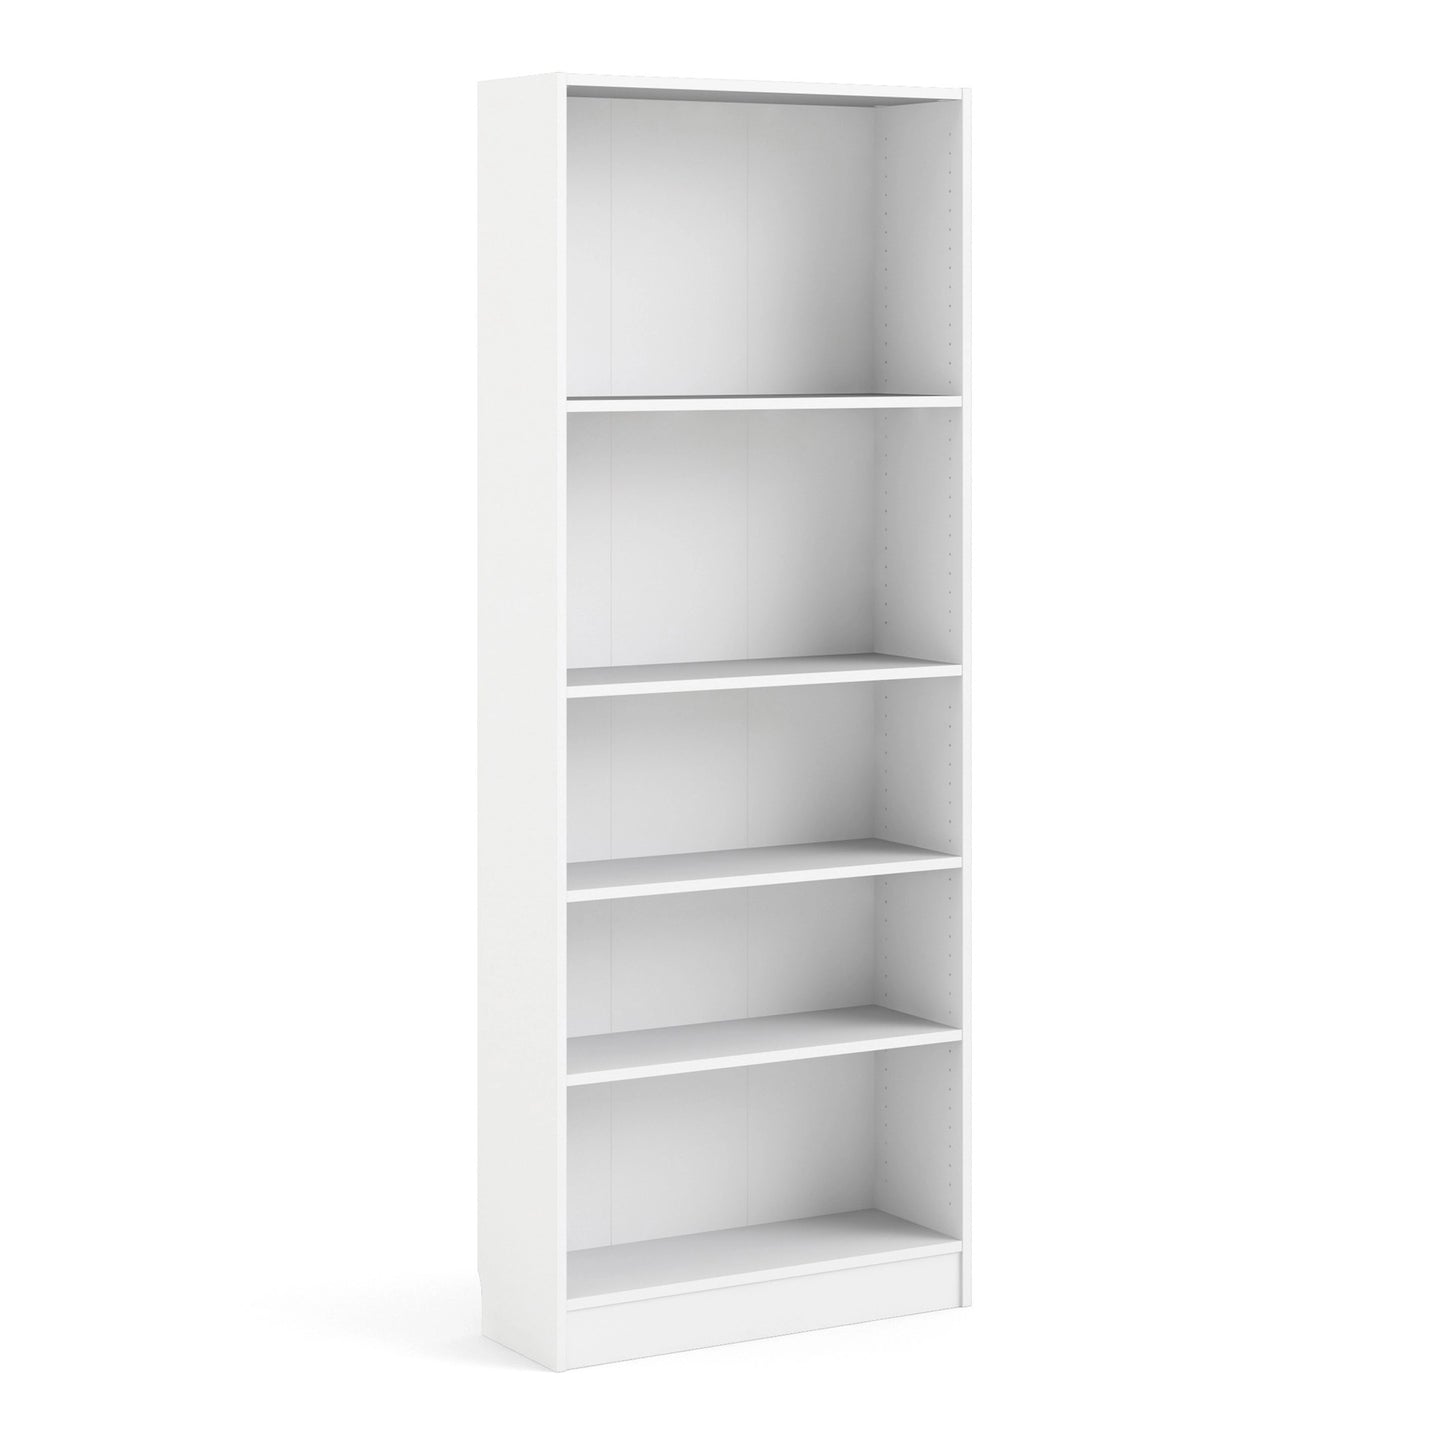 Furniture To Go Basic Tall Wide Bookcase (4 Shelves) in White